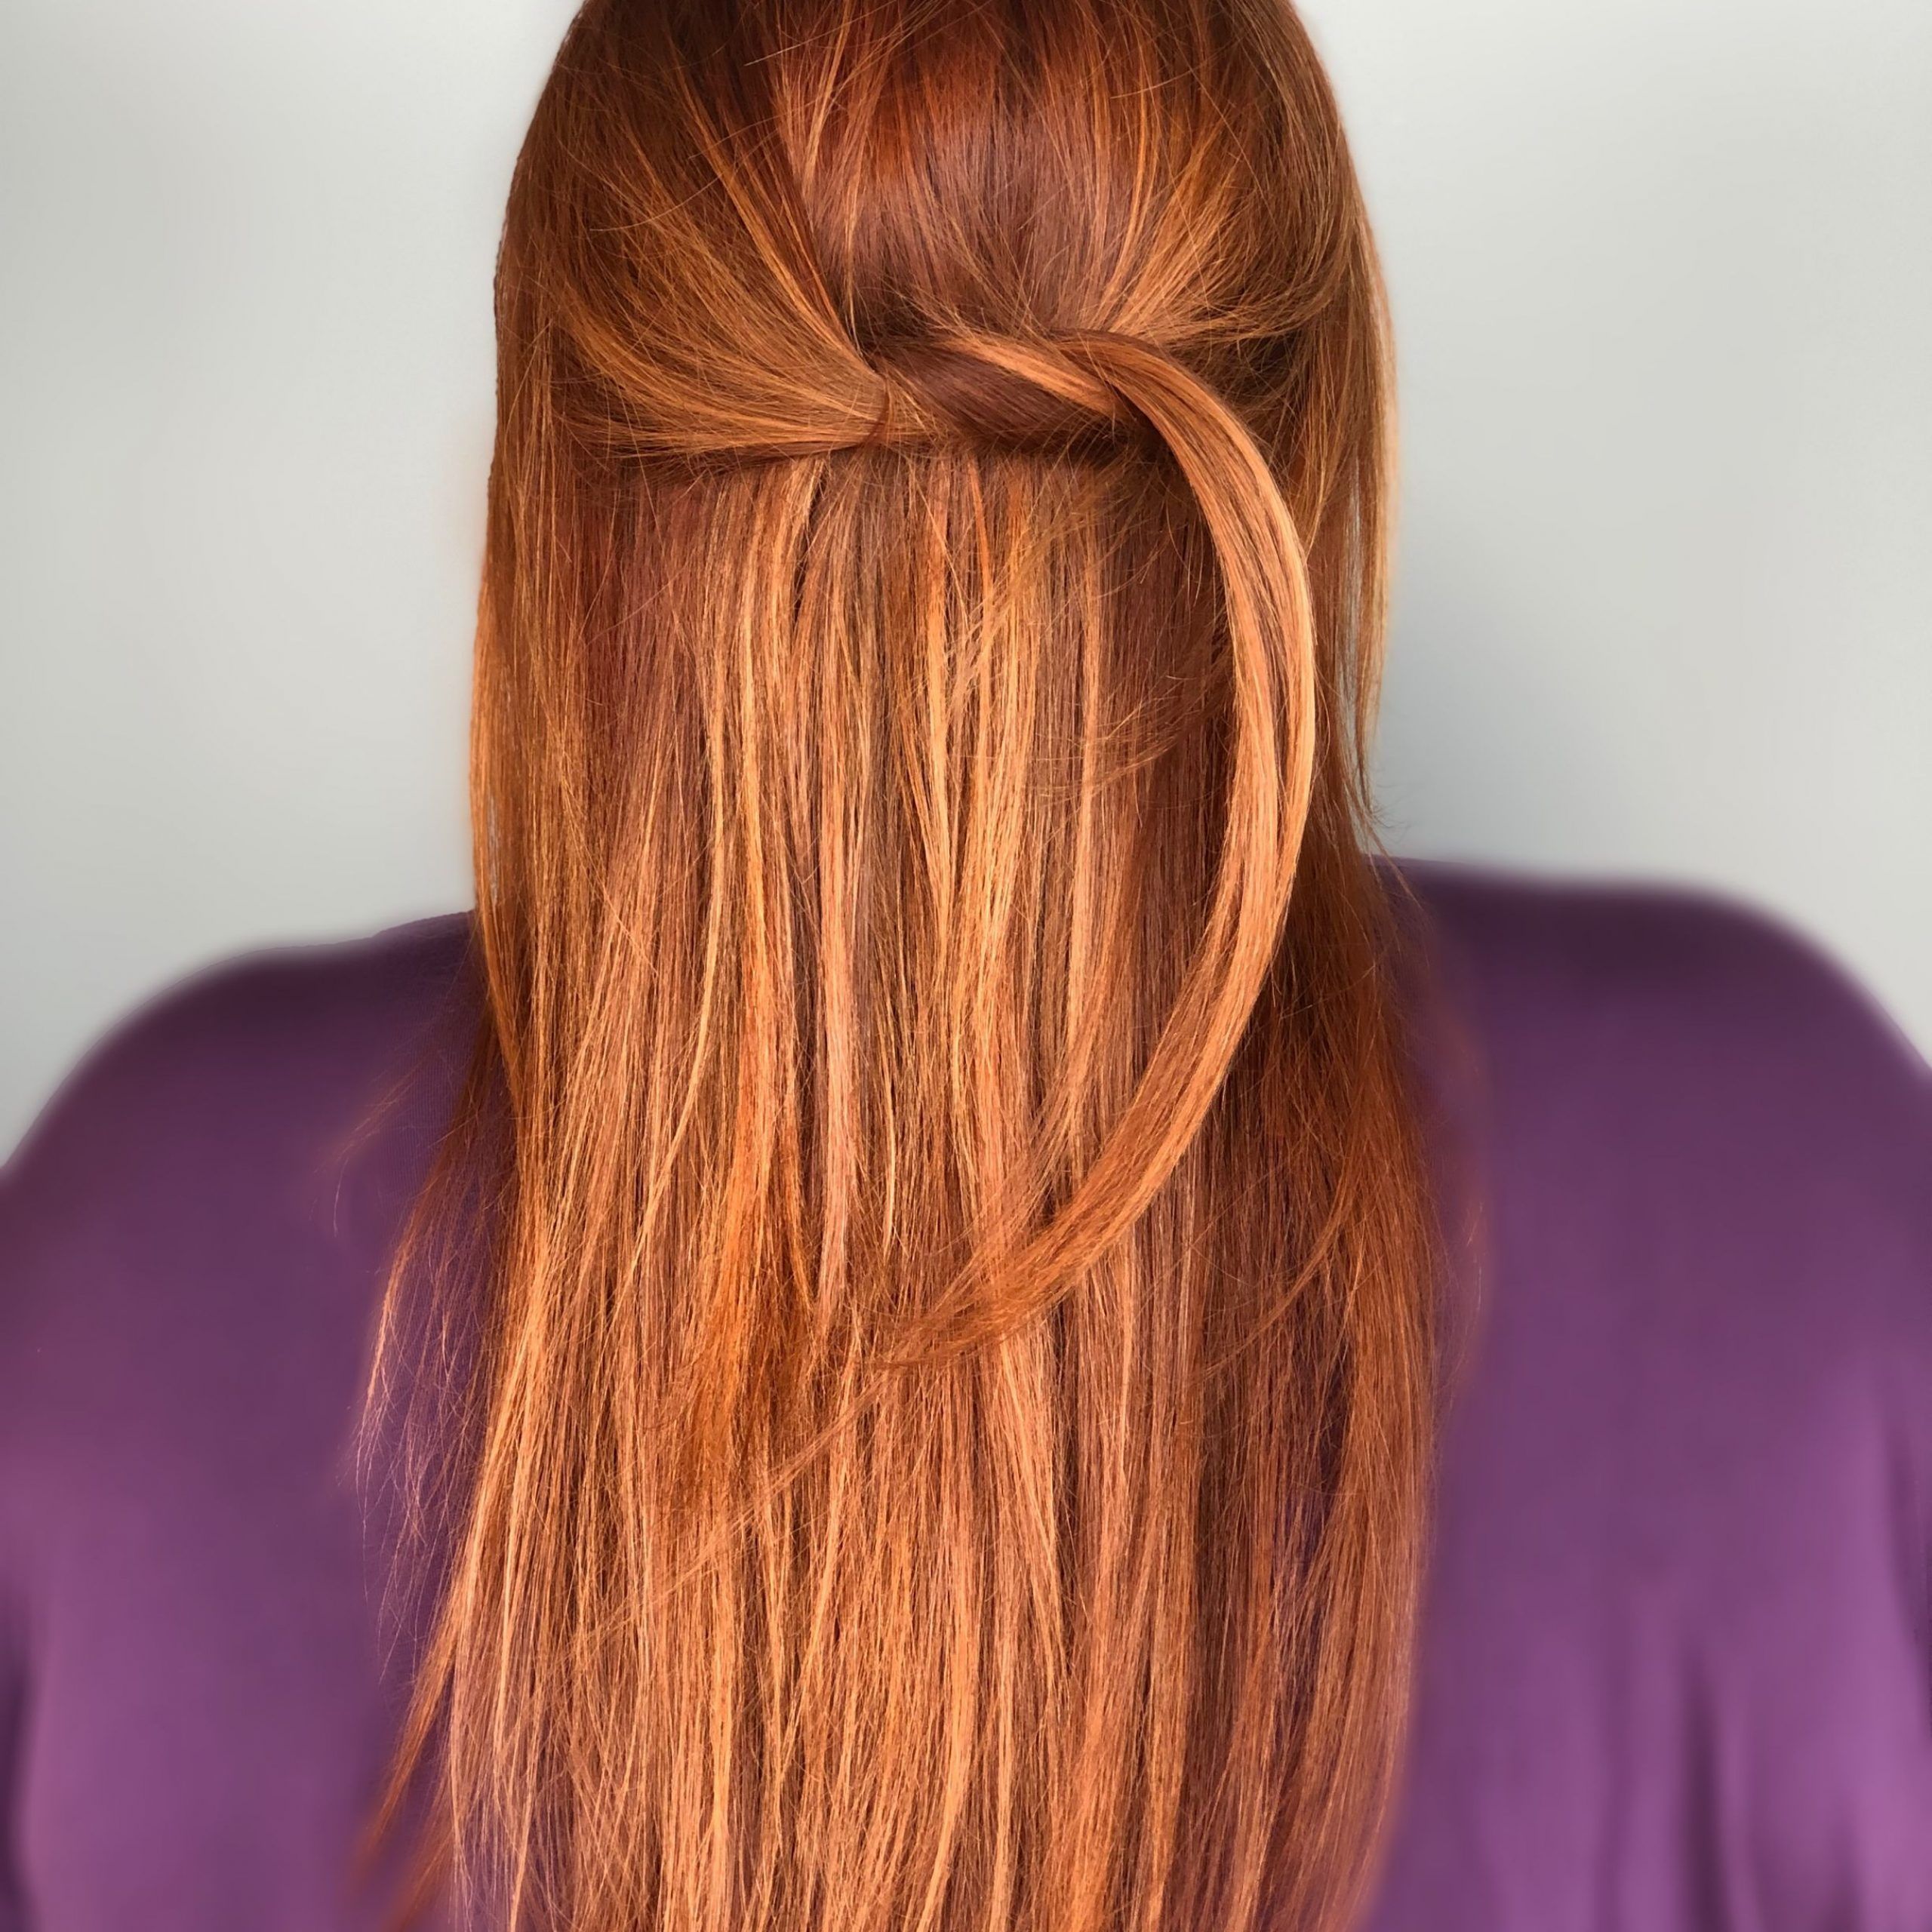 Ginger Balayage Hair | Balayage Hair, Hair, Red Hair Color Intended For Bright Red Balayage On Short Hairstyles (View 2 of 20)